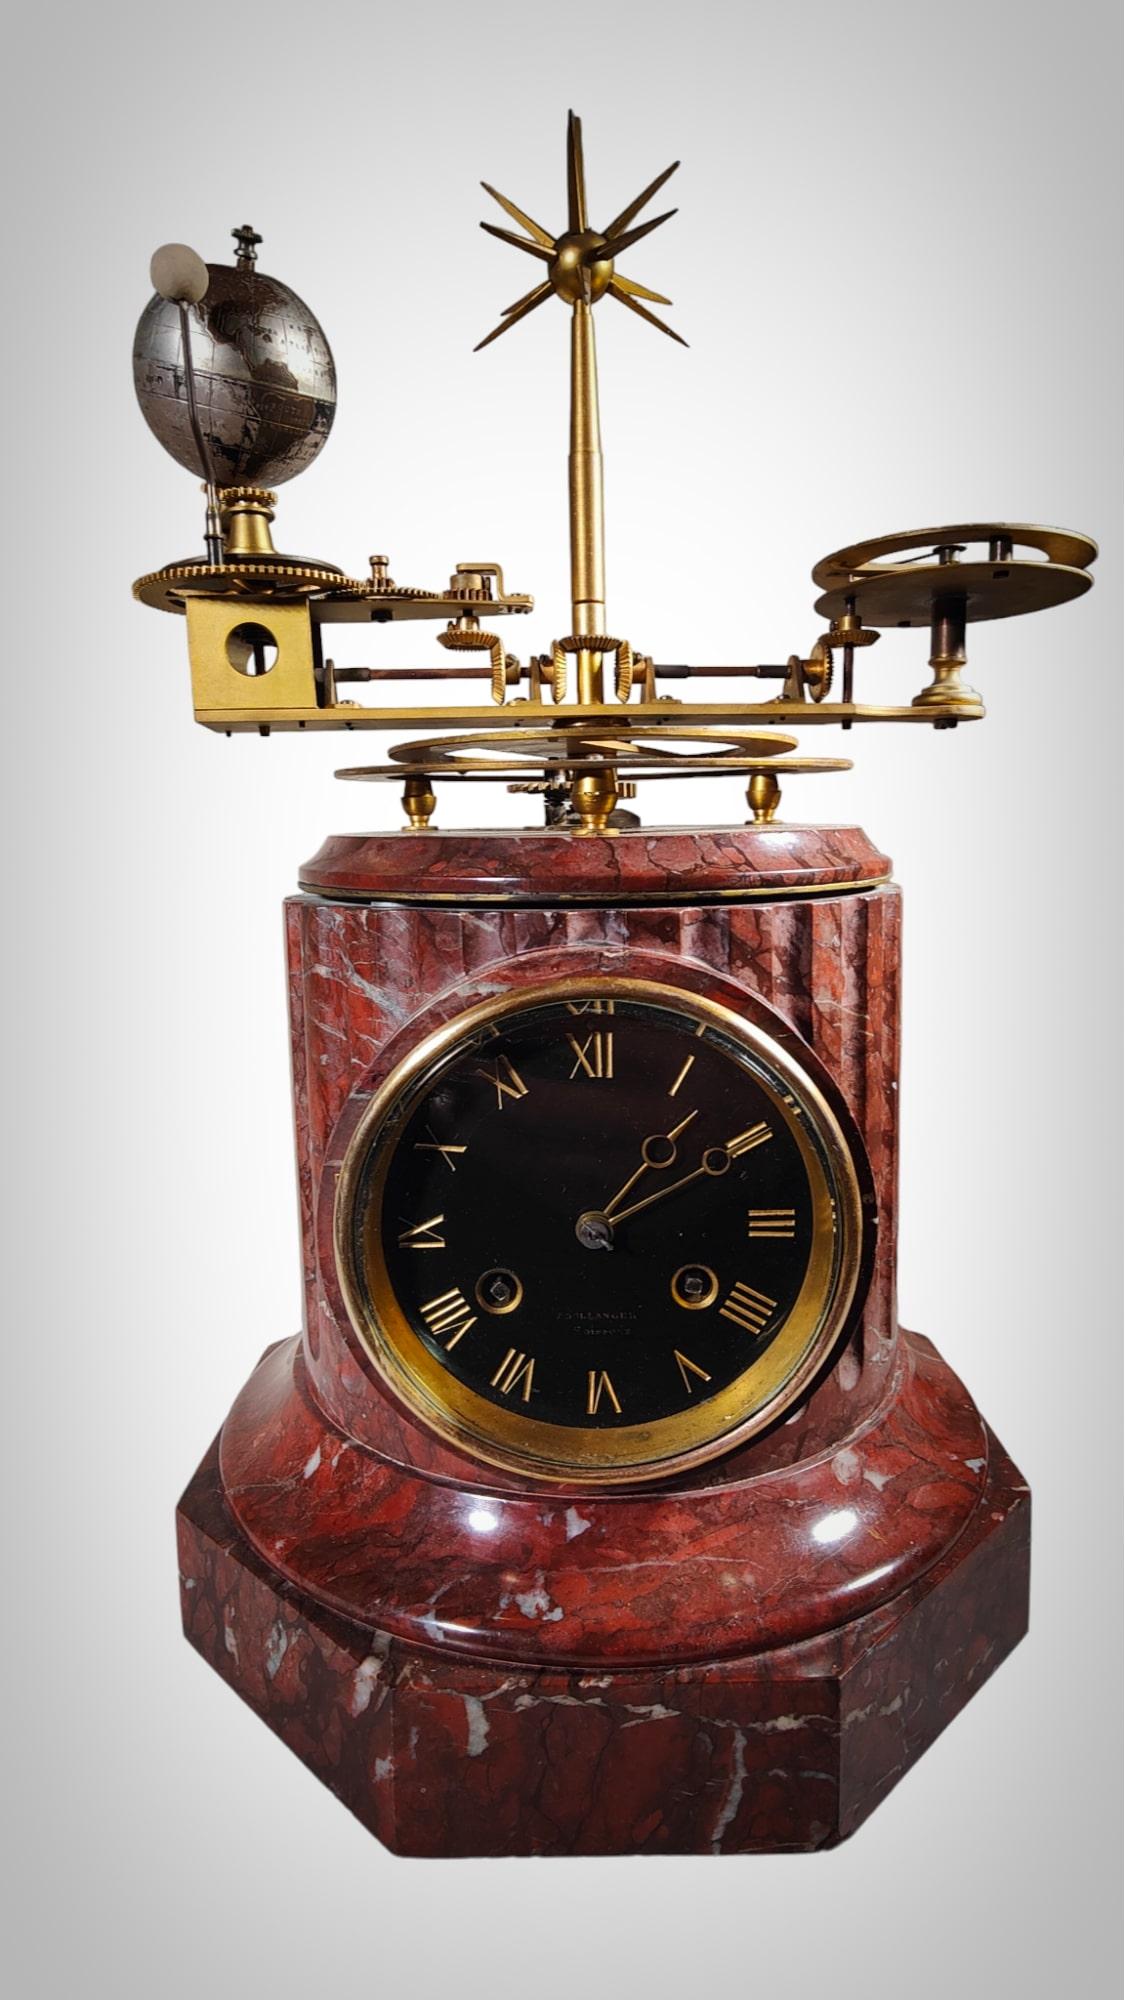 French Planetary Clock In Golden Brass And Tellurium Marble, Planetarium
Rare French planetary from the 19th century in brass and Royal Red marble base. There are two independent mechanisms, one for the clock which works and another for the